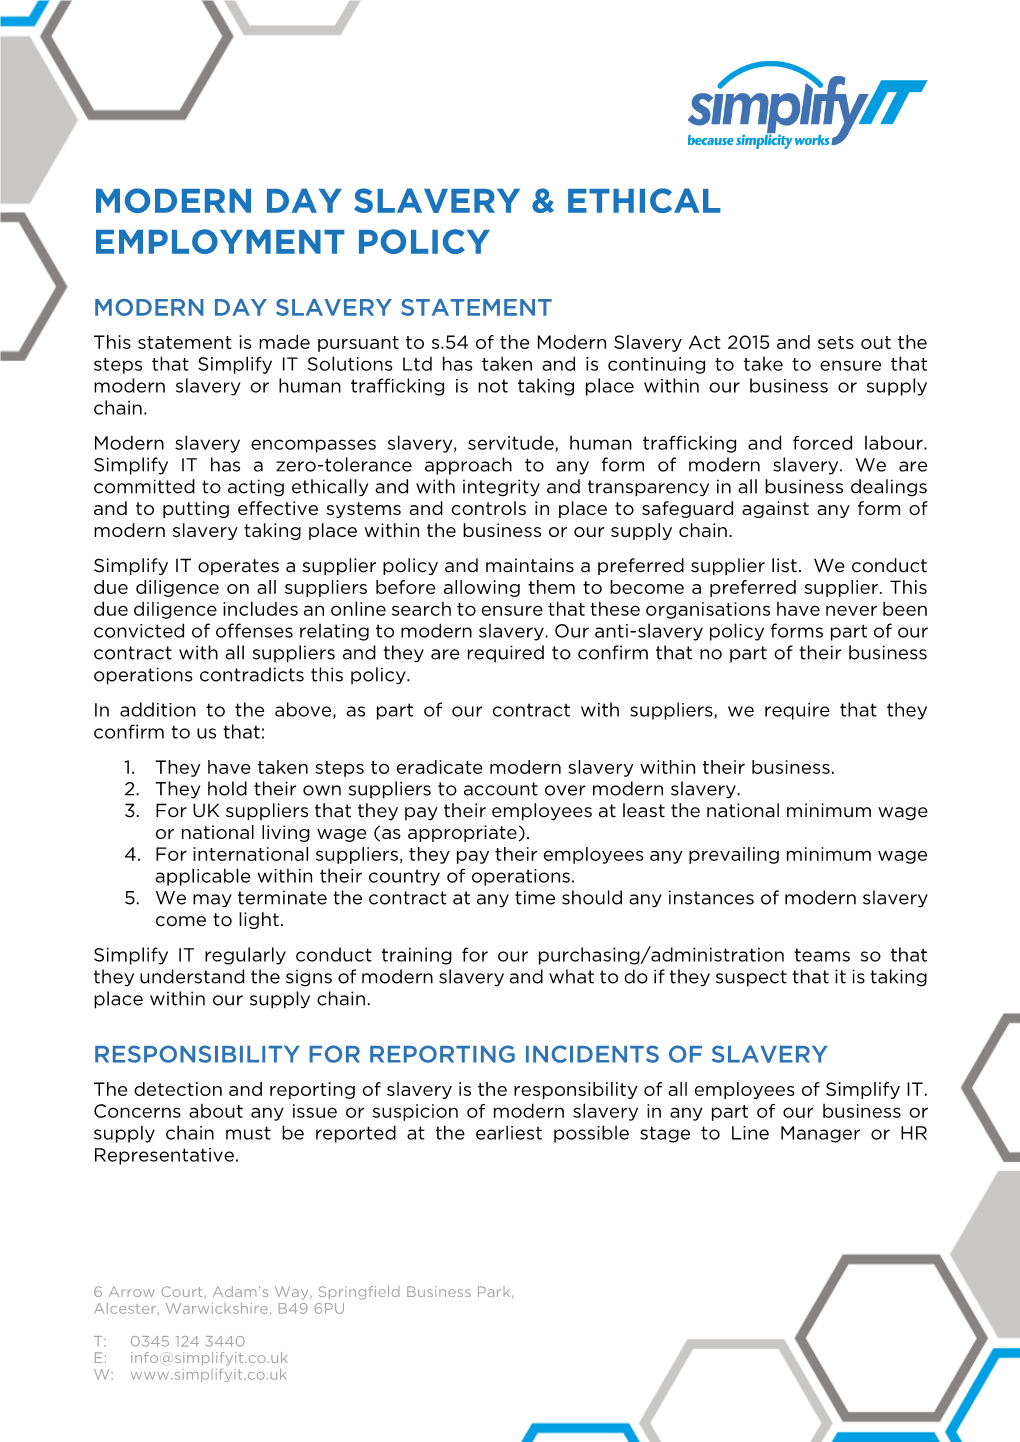 Modern Day Slavery & Ethical Employment Policy